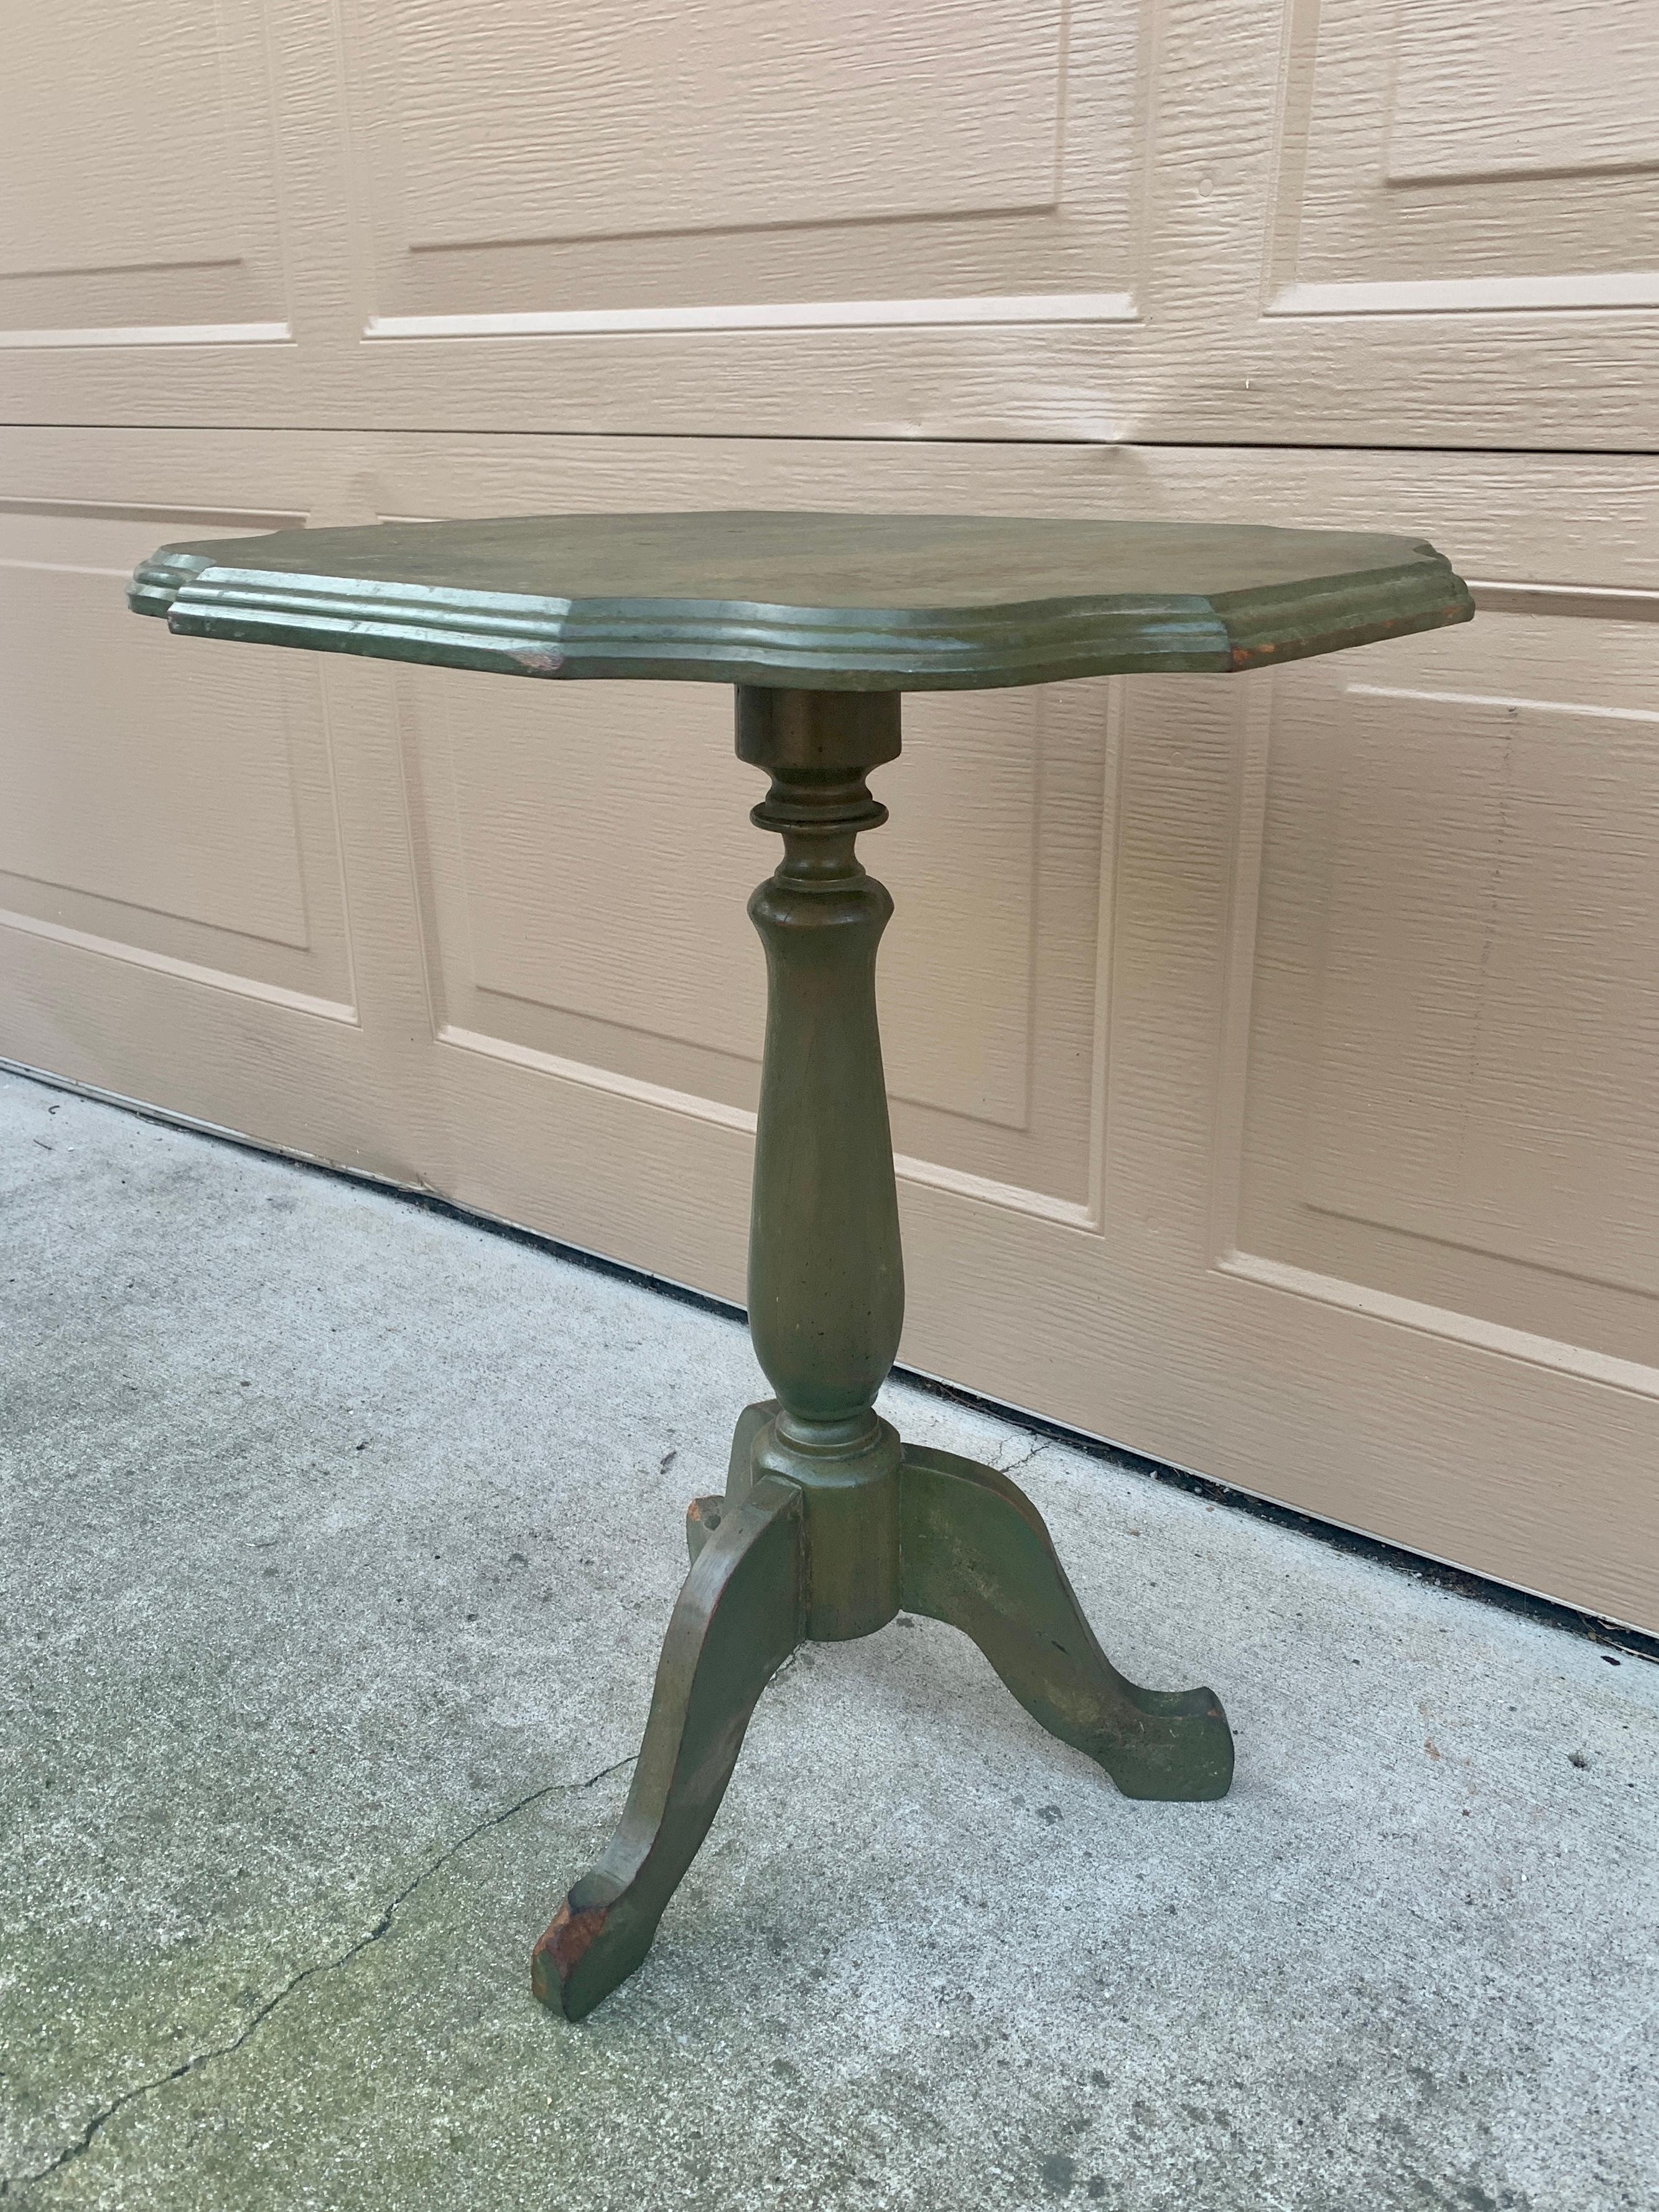 A gorgeous American colonial style flip top side table

USA, Circa 1950s

Painted walnut in a beautiful distressed green color.

Measures: 17.5